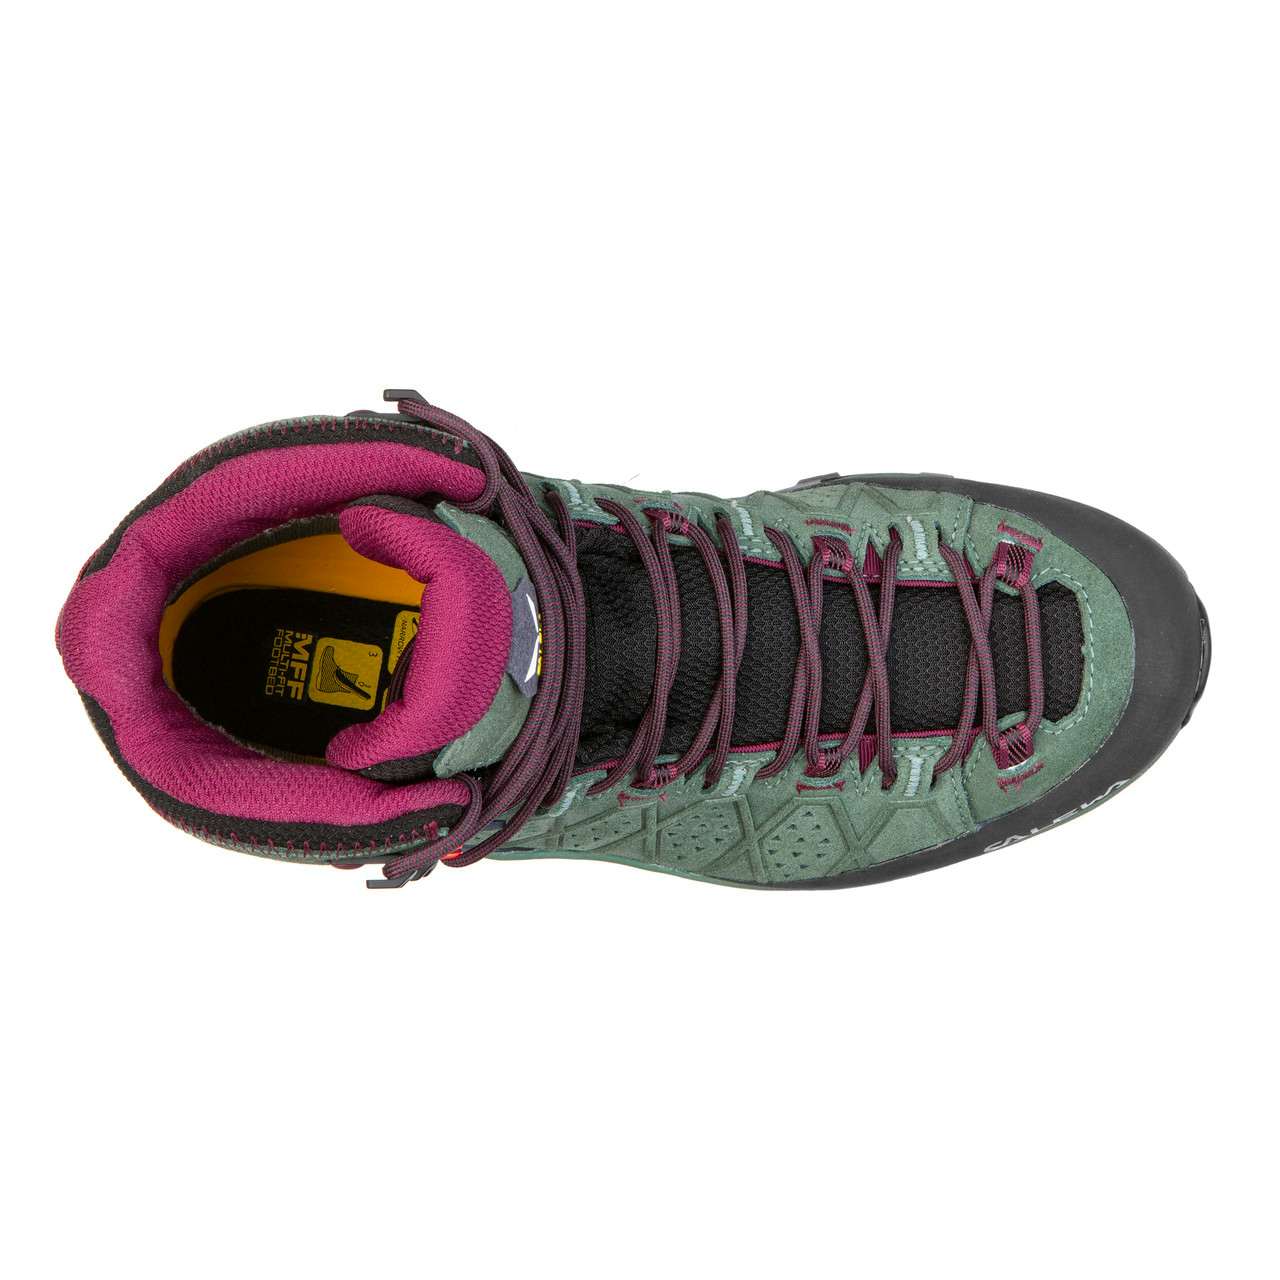 Alp Trainer 2 Mid Gore-Tex Light Trail Shoes Duck Green/Rhododendon